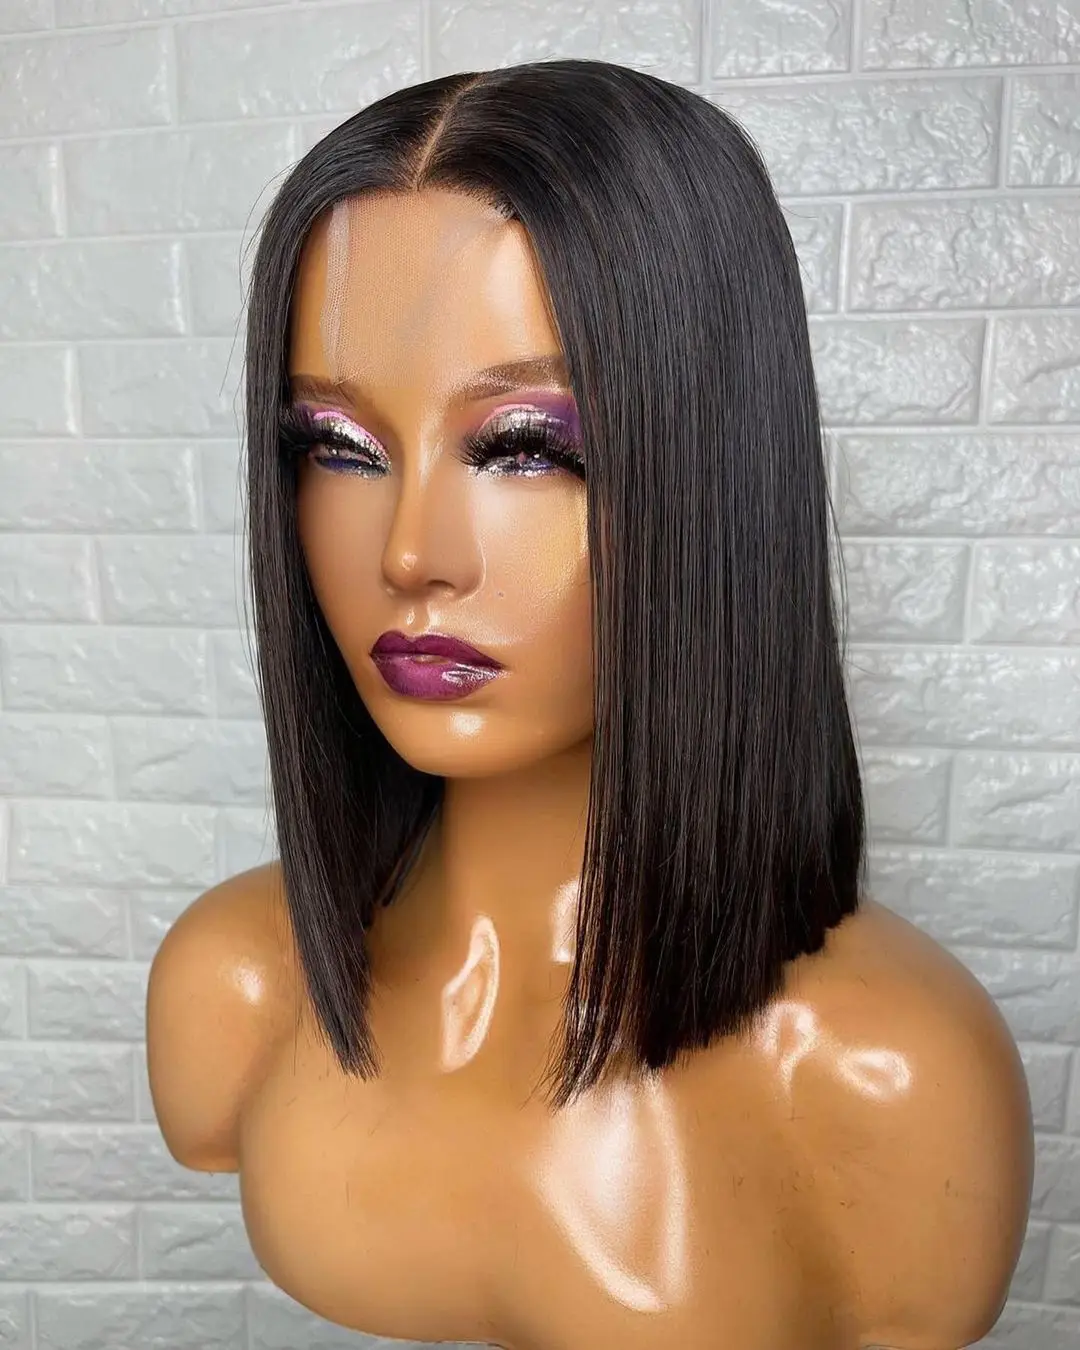 Black Hair Bob Lace Front Wigs Synthetic Short Hair Lace Wigs Heat Resiatant Fiber Hair Middle Part With Baby Hair Natural Look